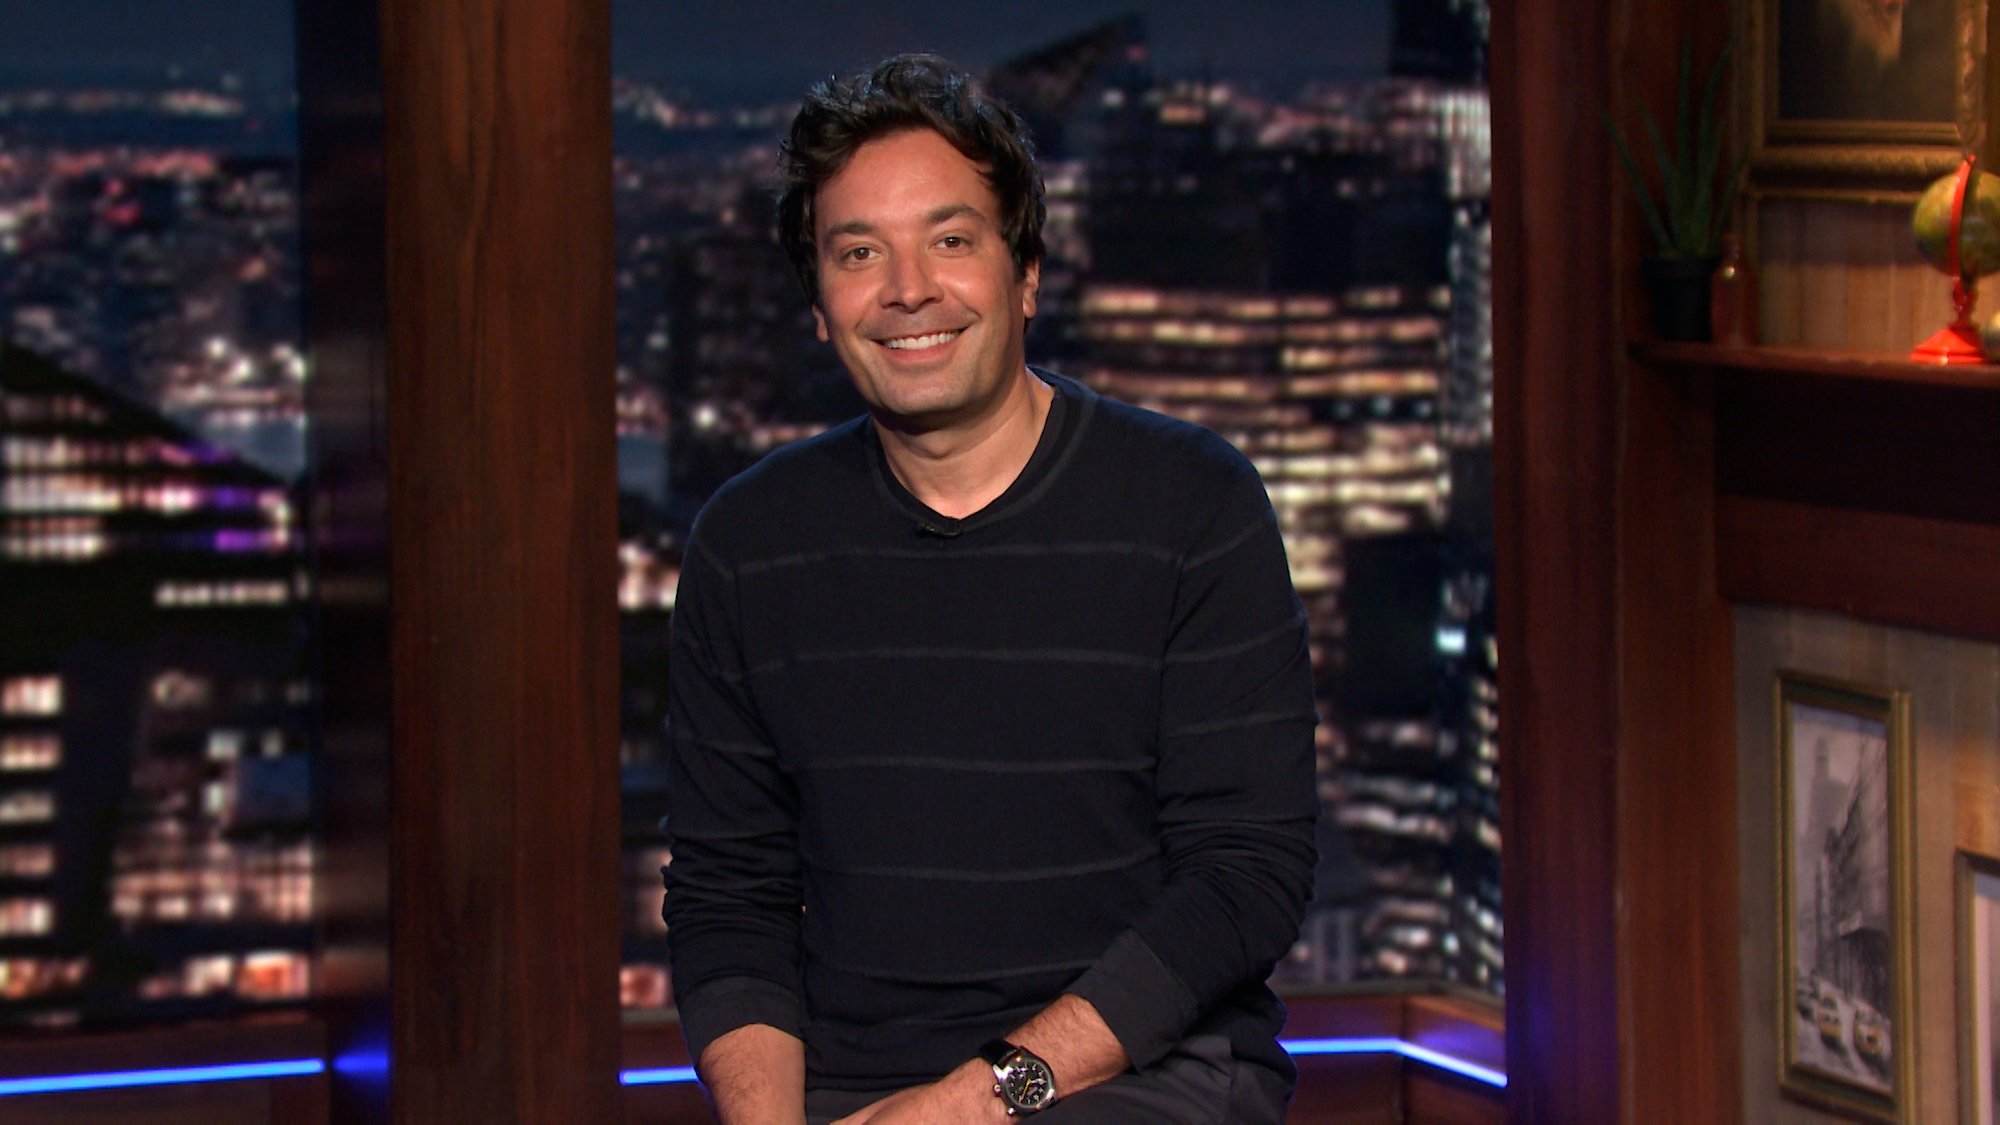 Jimmy Fallon smiling in front of a window